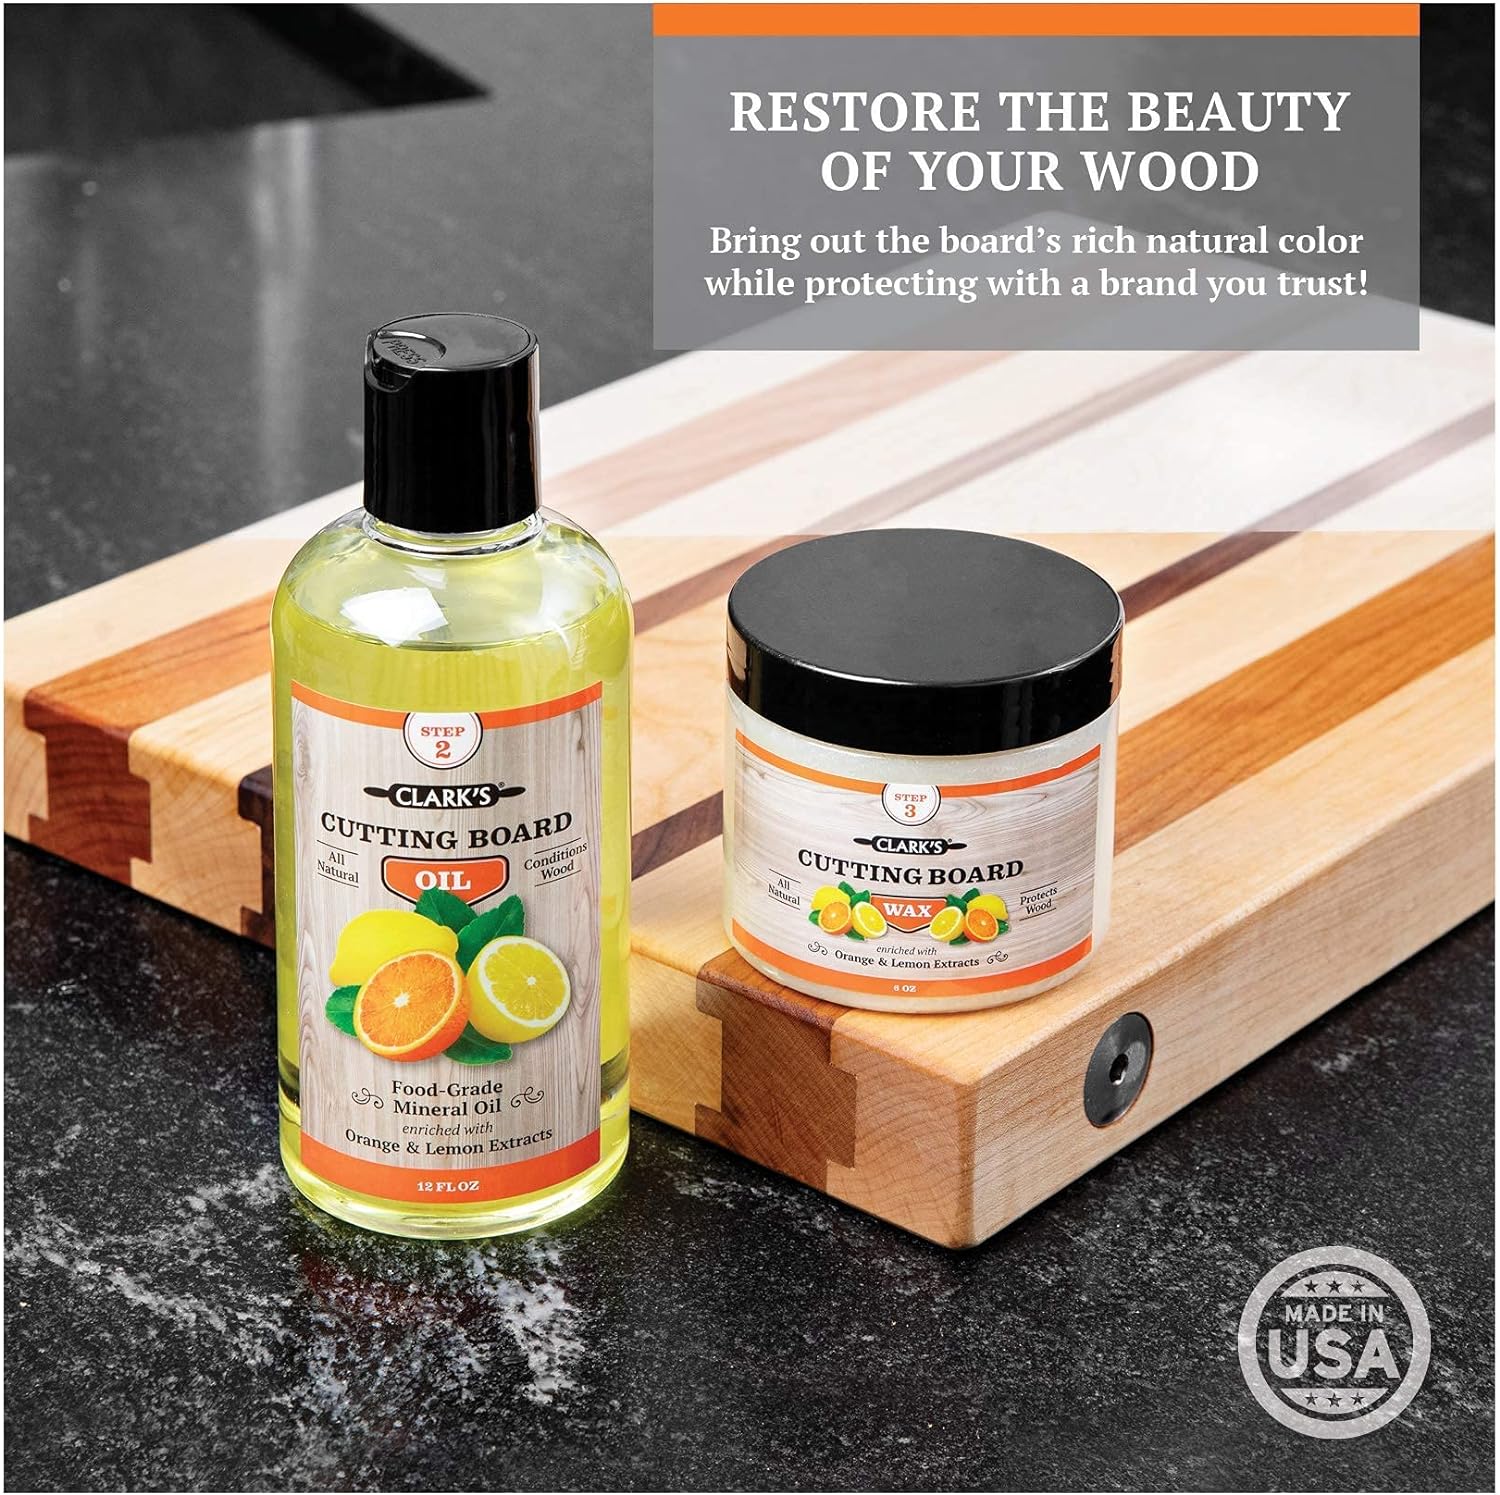 CLARK'S Cutting Board Soap, Oil, and Wax All 3 Products Needed for Perfectly Preserving your Favorite Butcher Block, Cutting Board, Wood Bowl, Utensils, Counter Top and More! : Health & Household